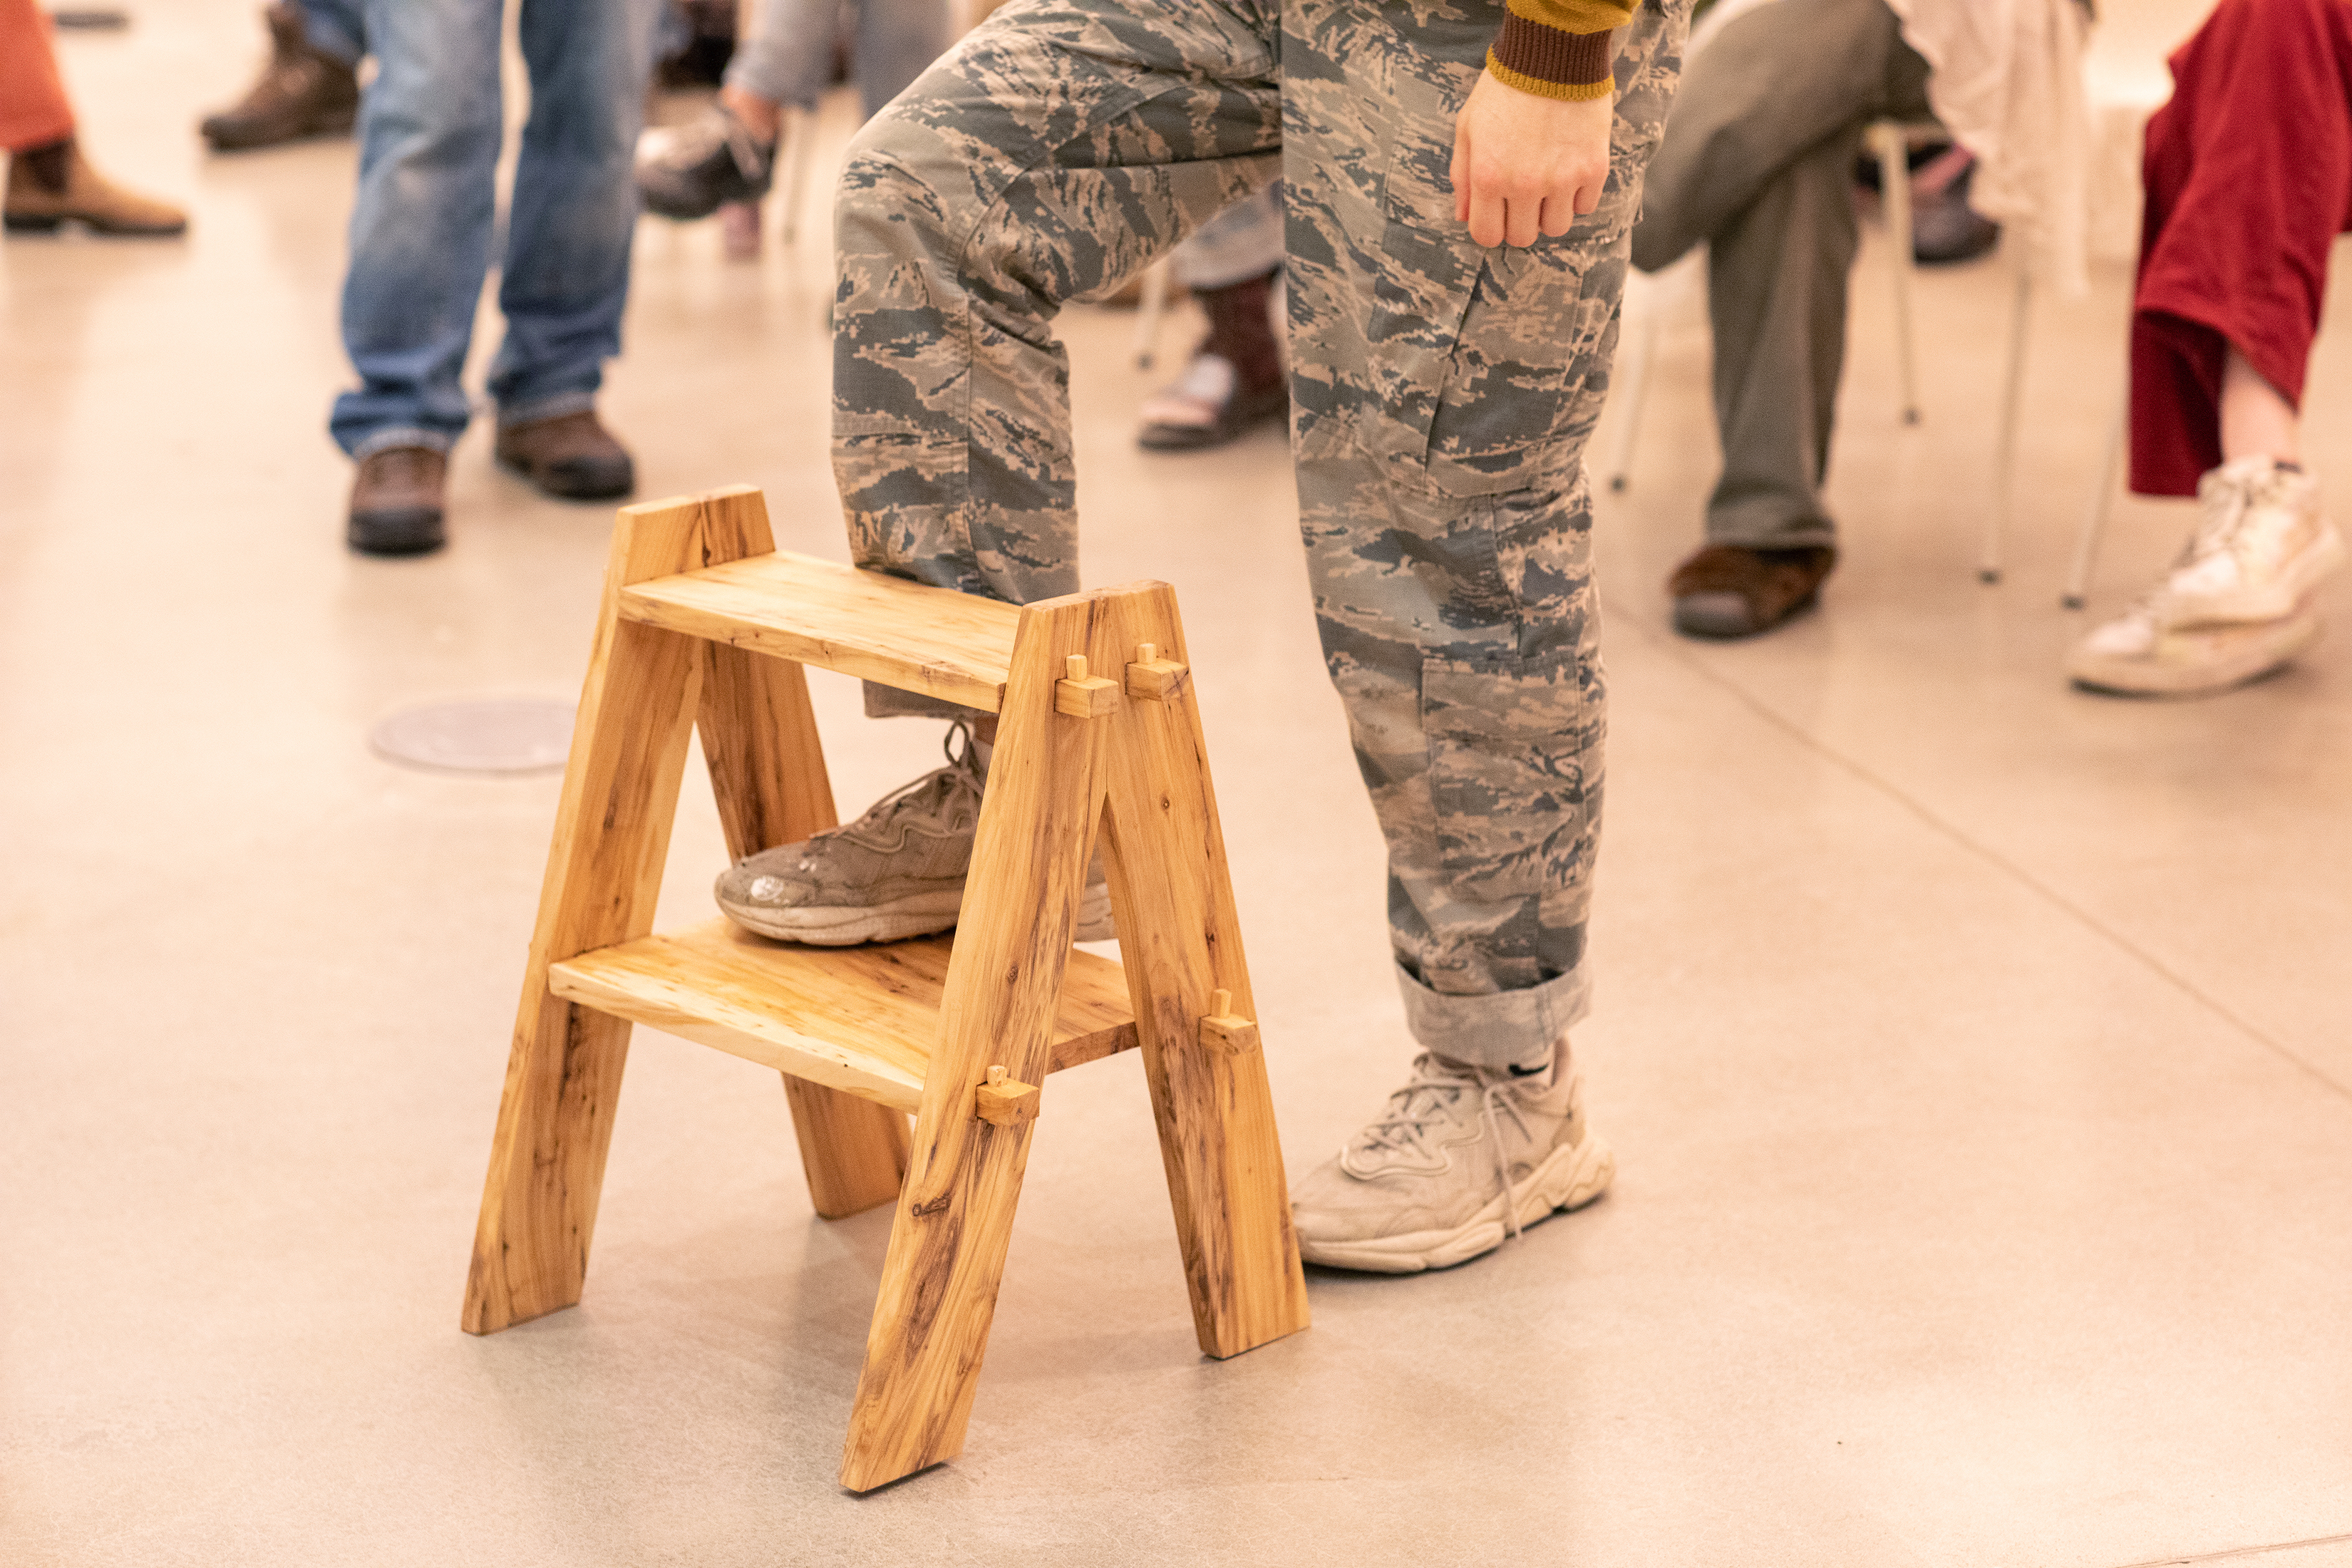 a student tests a willow step-stool